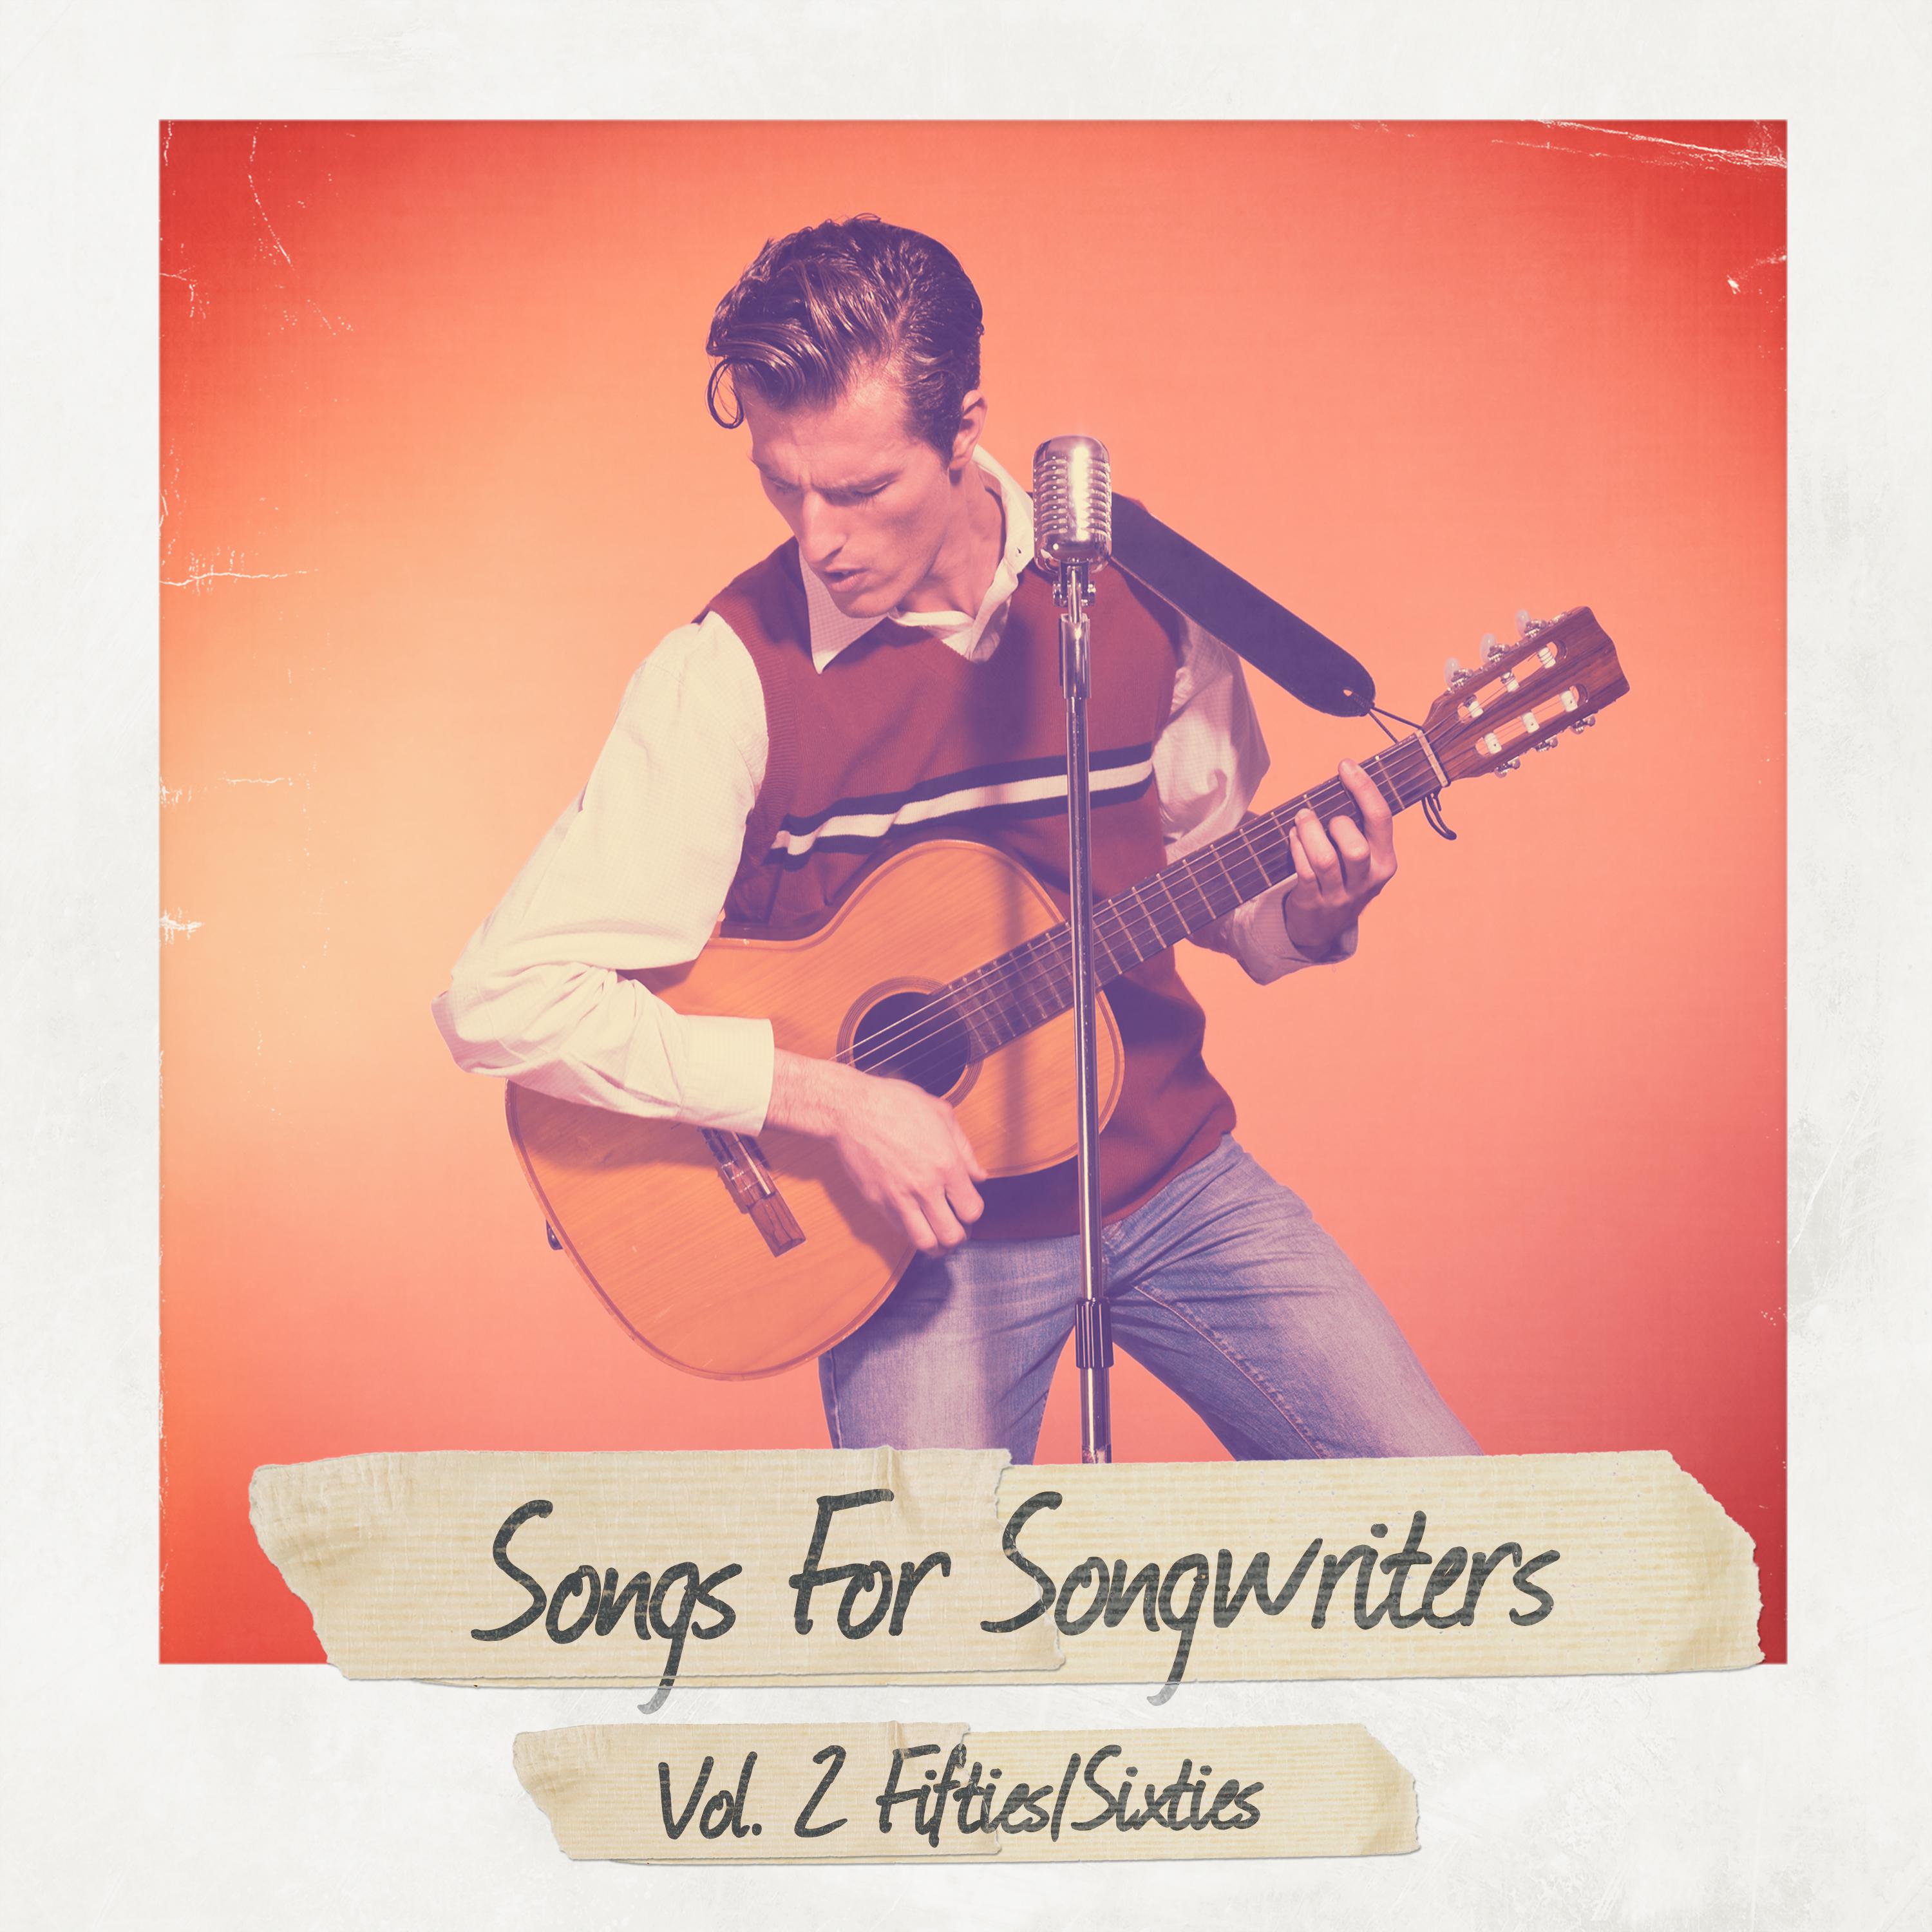 Songs For Songwriters, Vol. 2: Fifties/Sixties (DUPLICATE PRODUCT - DO NOT USE)